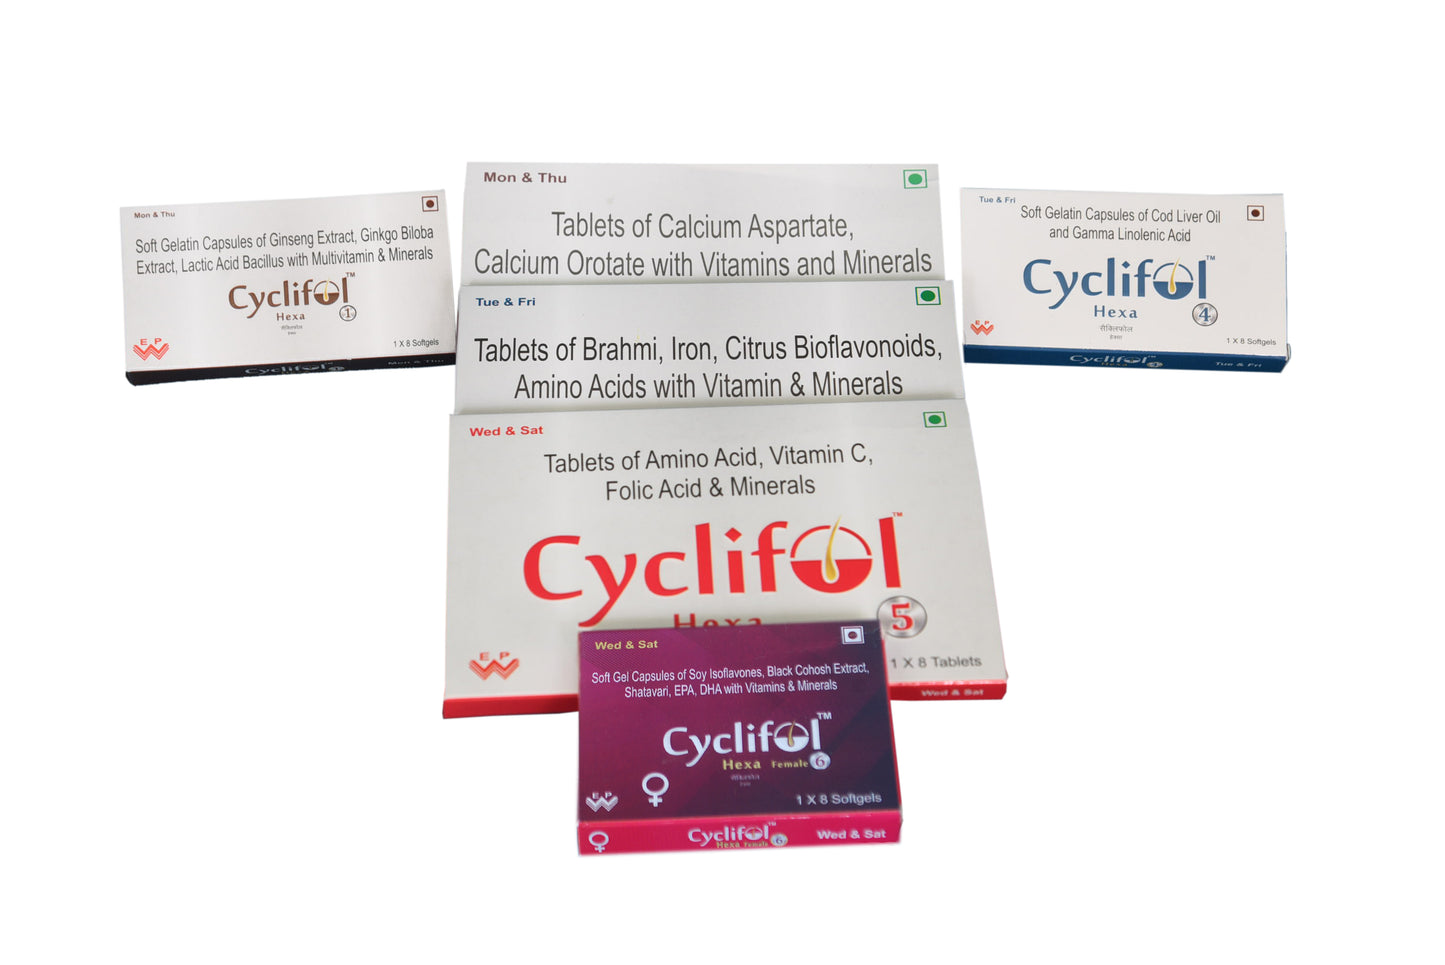 Cyclifol Hexa Female is specially designed kit for hair growth stopping hair loss and for Increase in hair Density developed by East West Pharma .